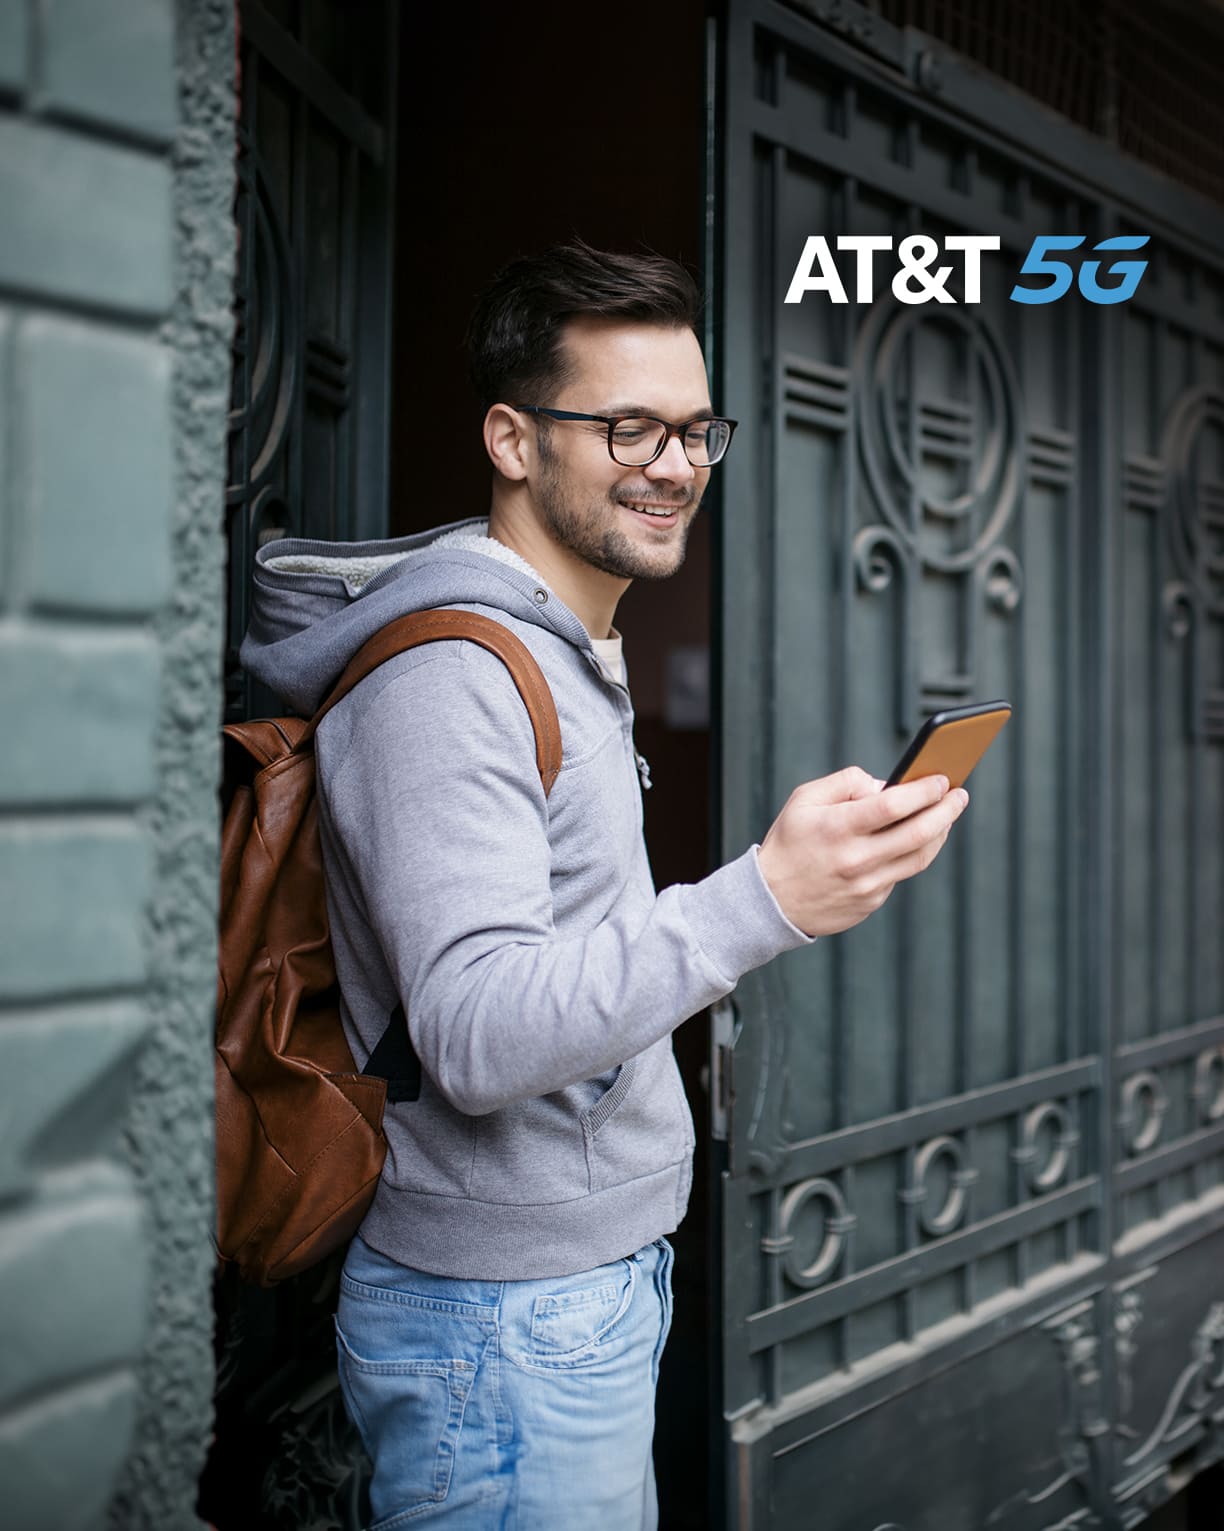 AT&T USA and Canada 7 Days Unlimited Data Travel SIM Card, 4G LTE/3G Data  for USA, and Canada for Unlocked iPhone, iPad, Android Phones,Tablets and